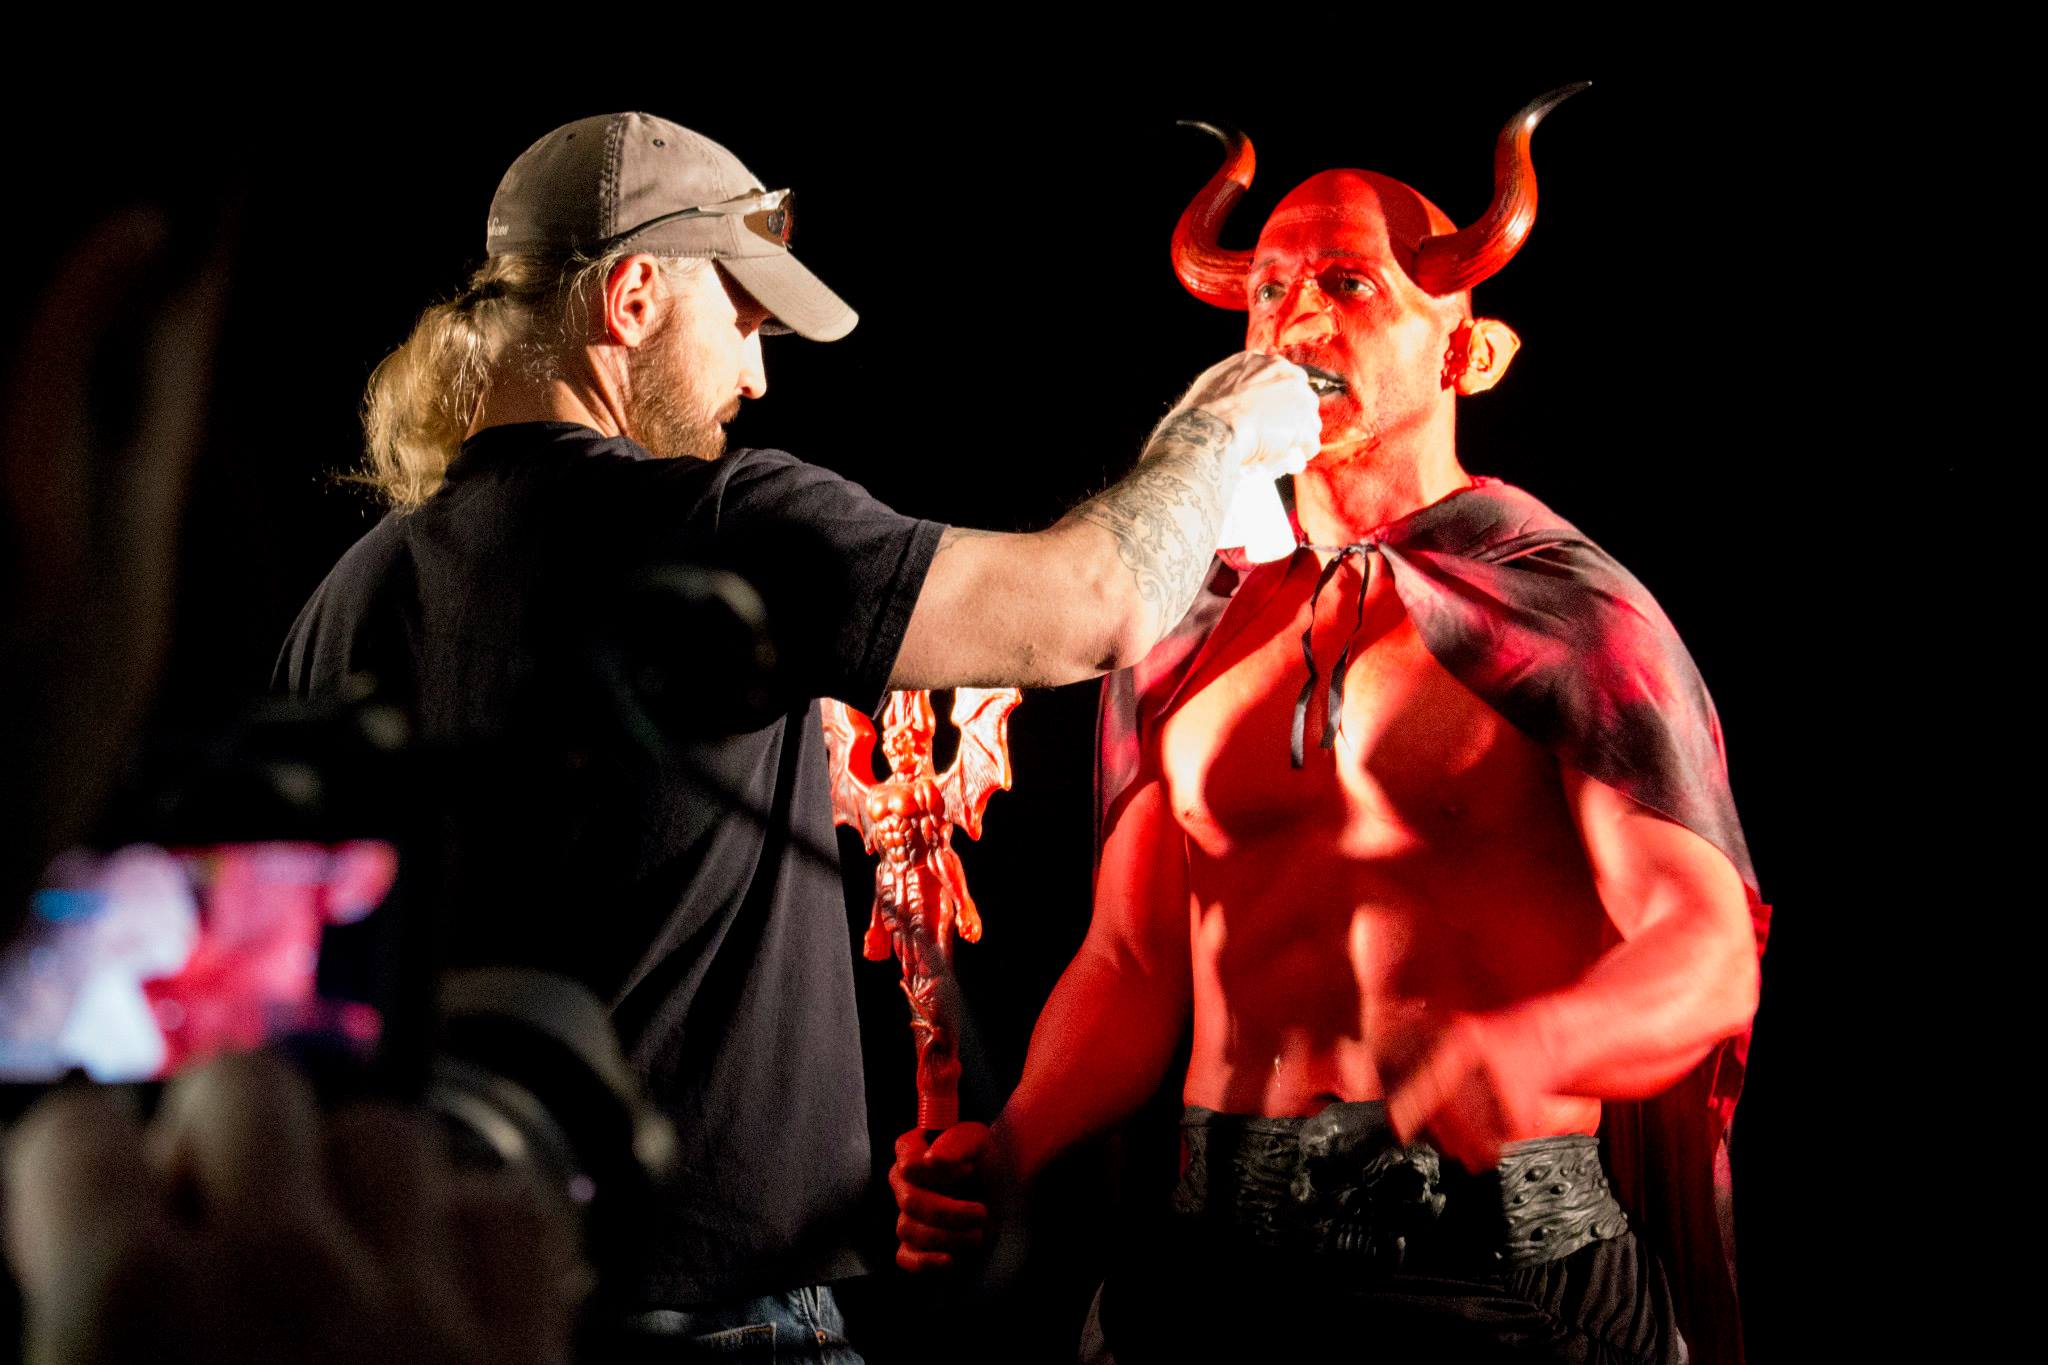 Make up artist Johnny Collins adding the finishing touches to The Devil in Fuzz on the Lens Productions short, 